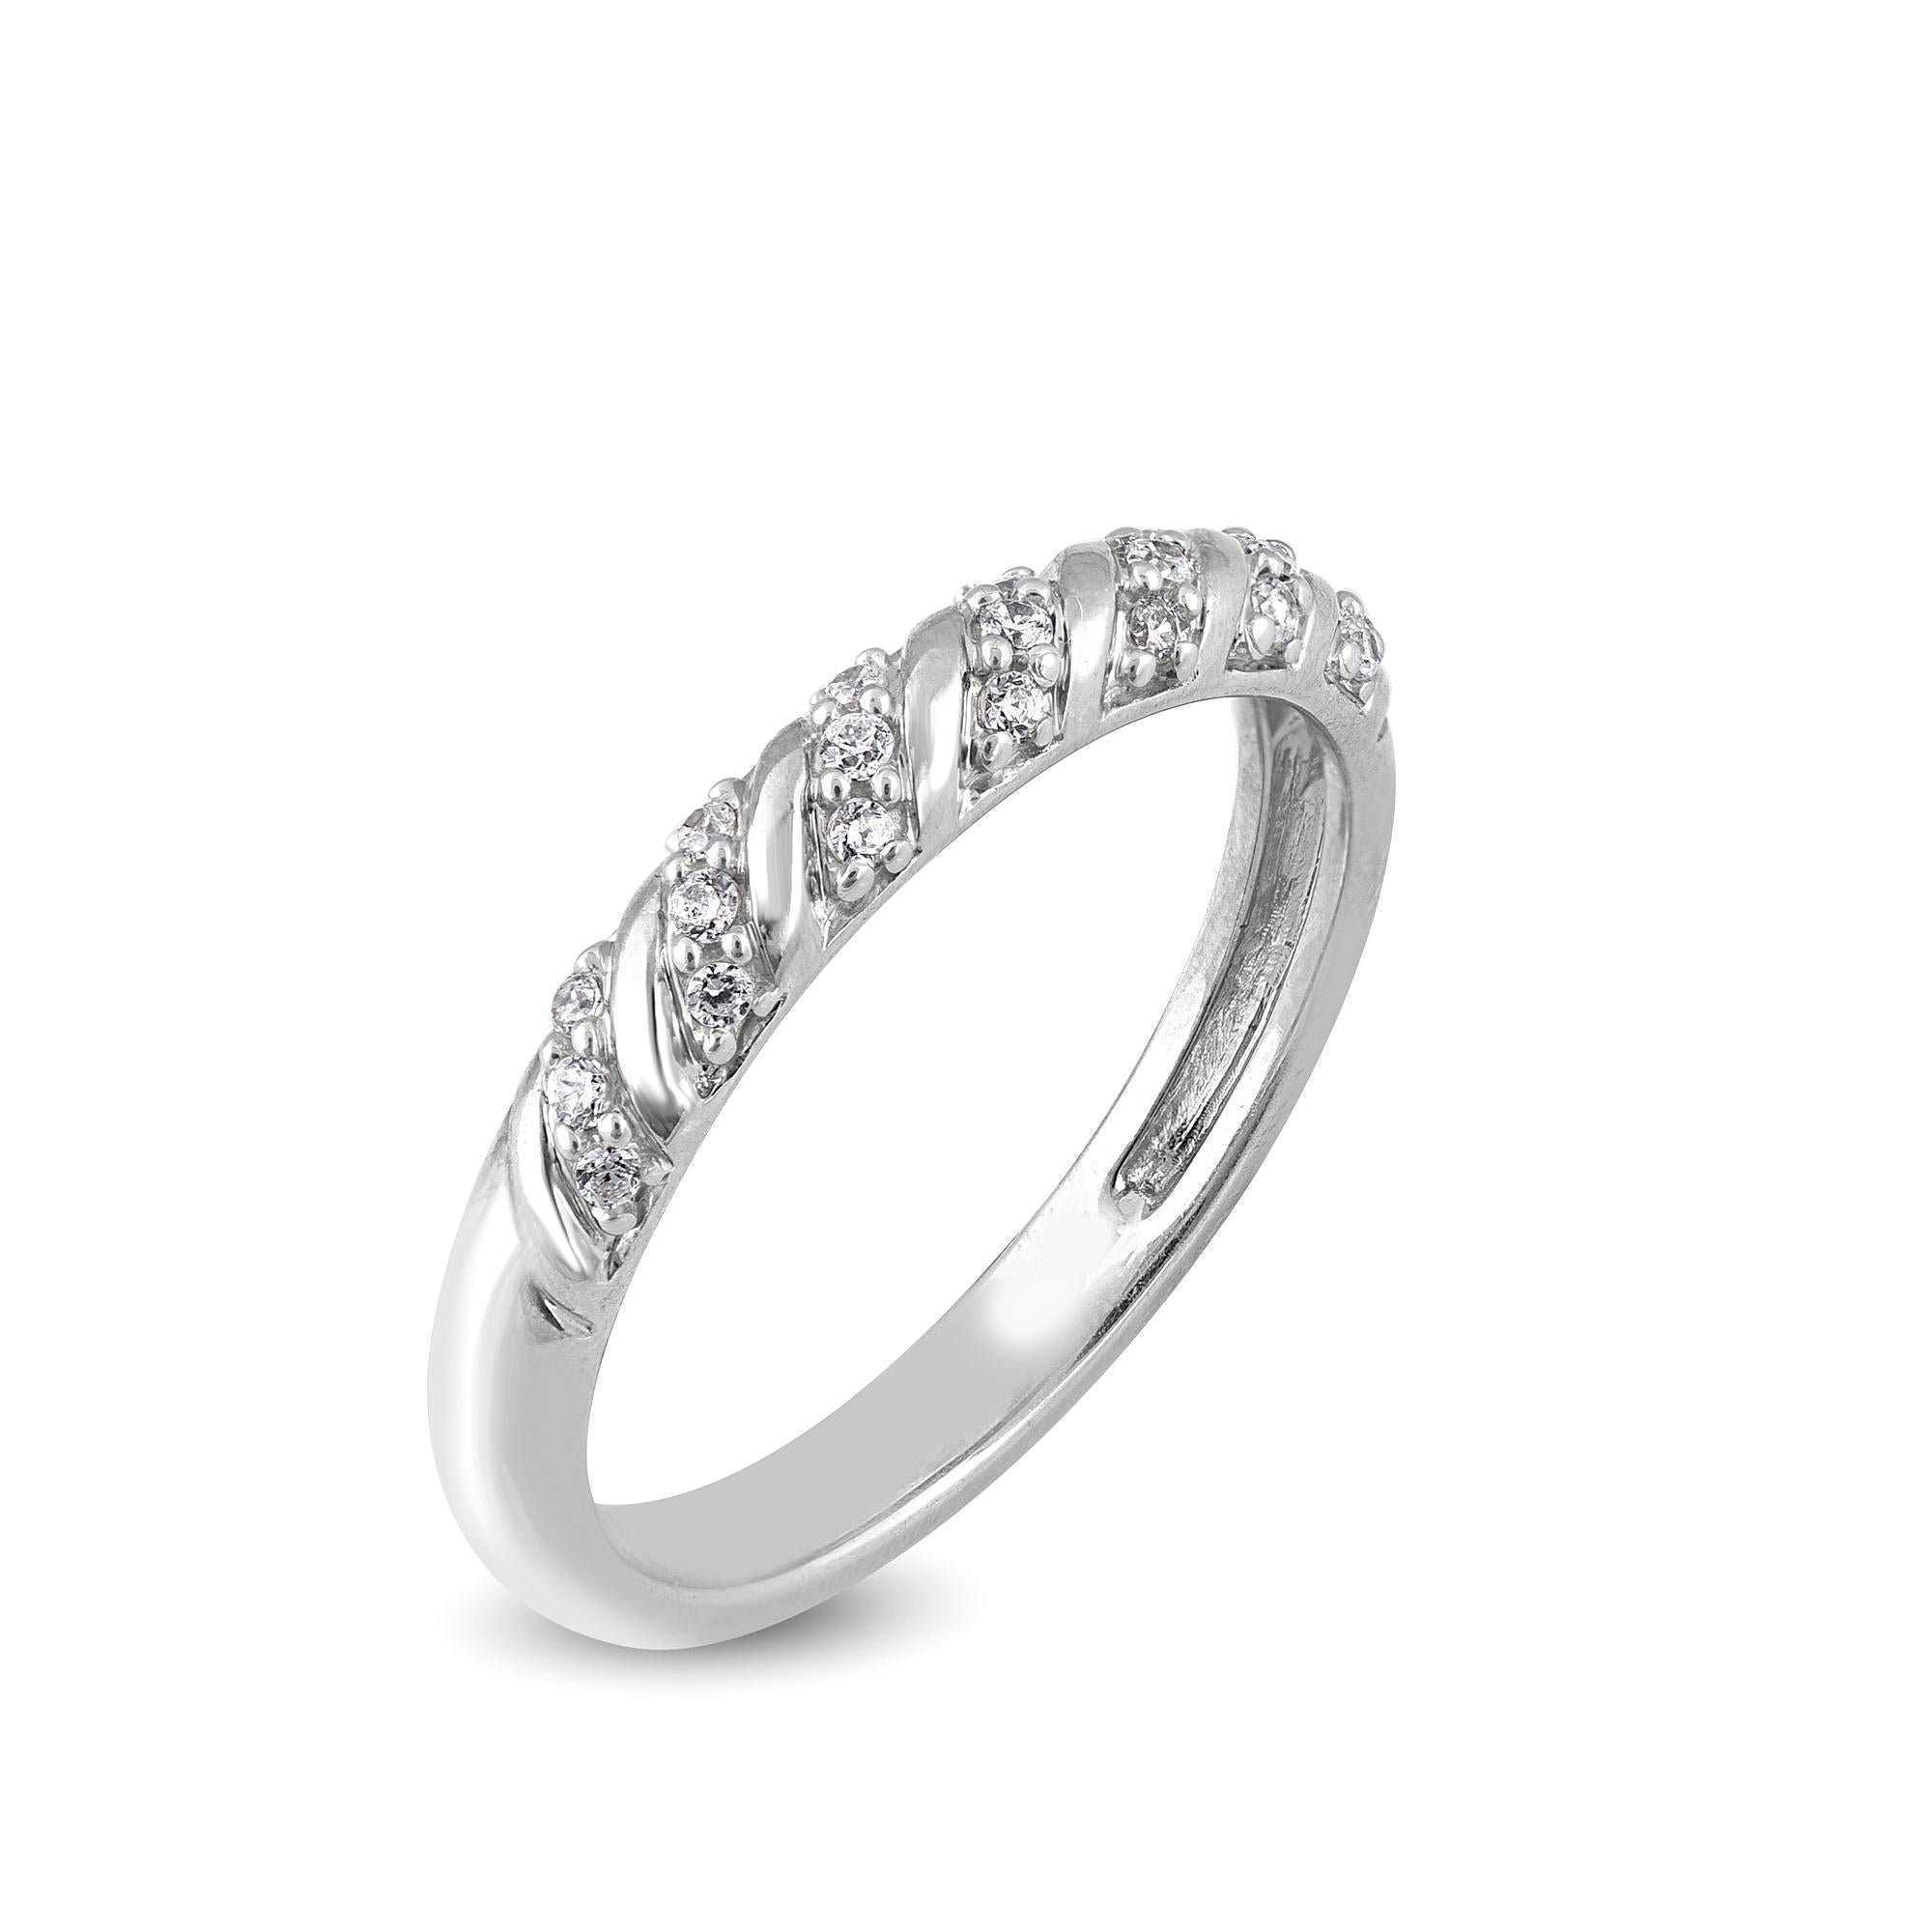 Bring charm to your look with this diamond wedding band Ring. This ring is beautifully crafted in 14 Karat white gold and embedded with 21 natural round brilliant cut diamonds in pave setting. Total diamond weight is 0.15 carat. The diamonds are